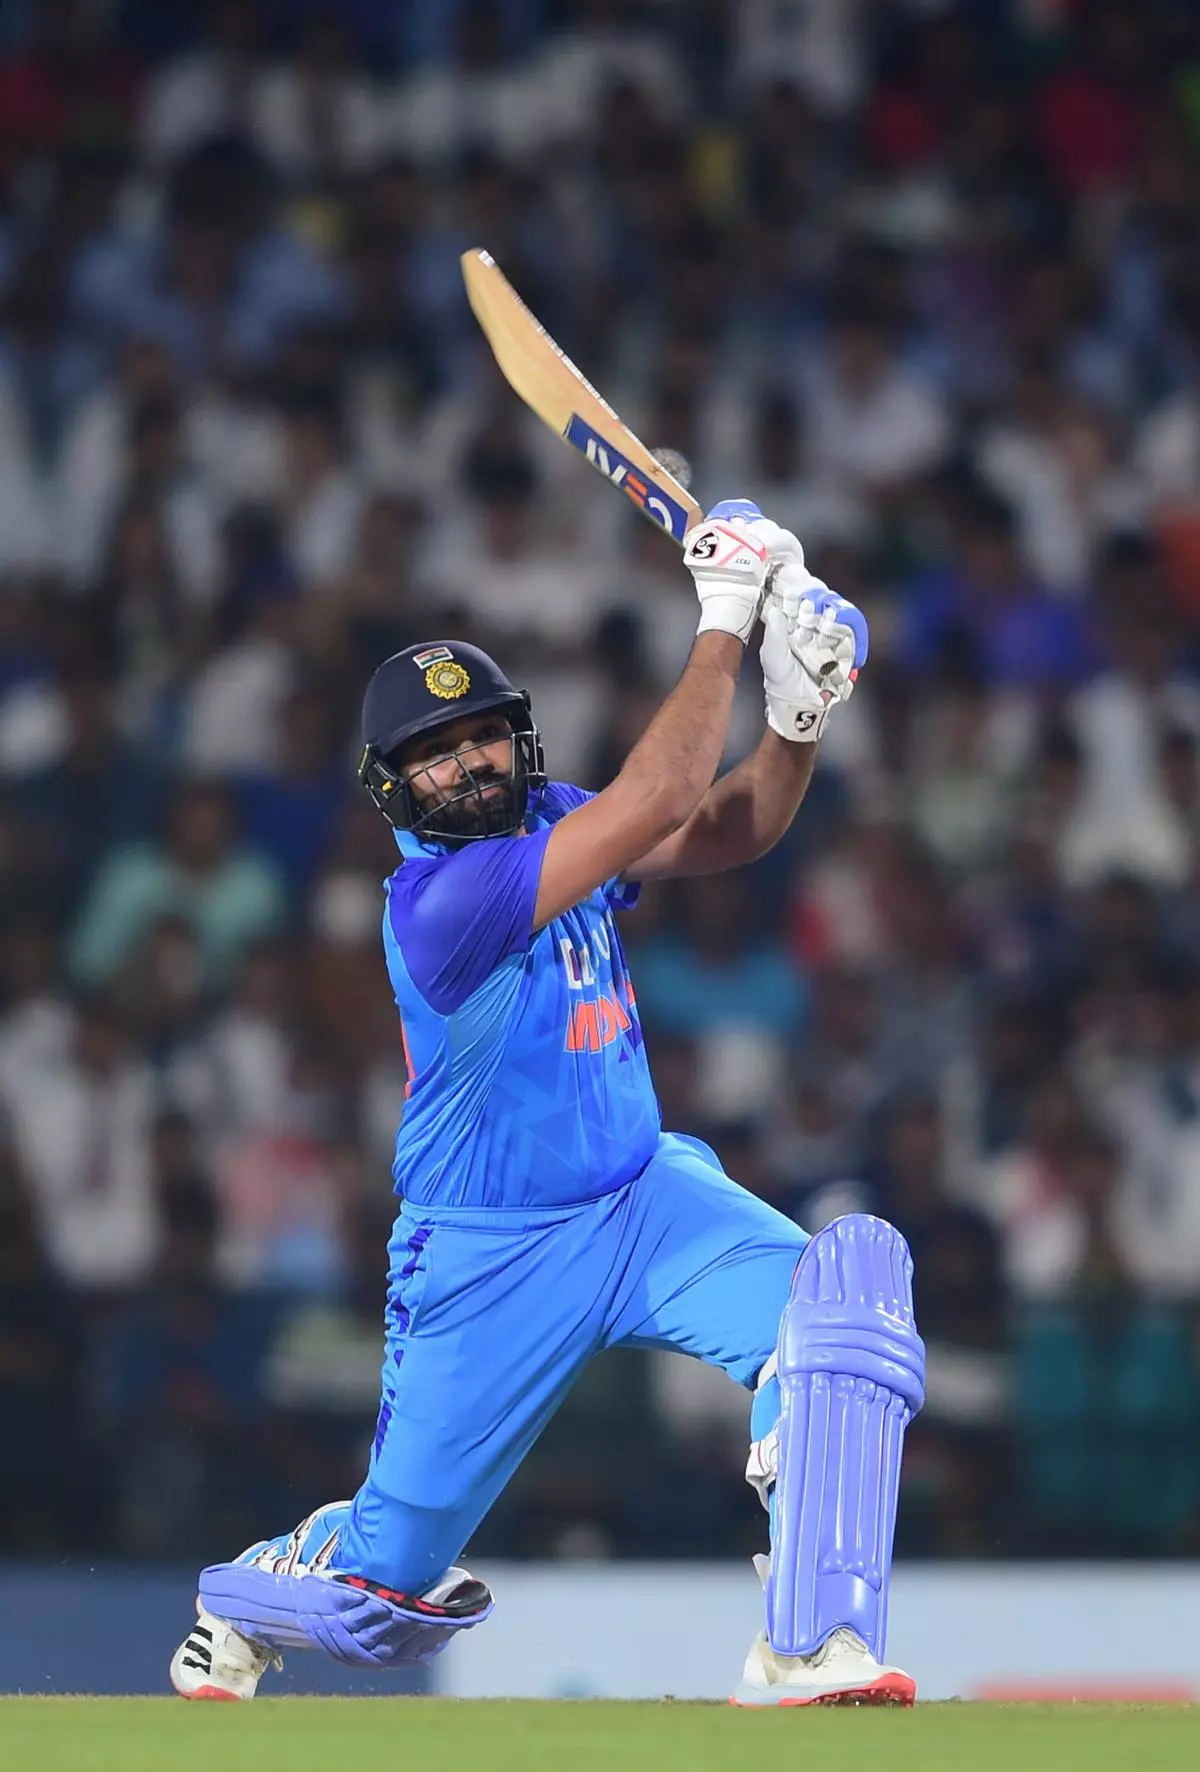 Indian captain Rohit Sharma plays a shot during the 2nd T20 cricket match between India and Australia, at Vidarbha Cricket Association Stadium in Nagpur on Sept. 23, 2022. (Source: PTI)